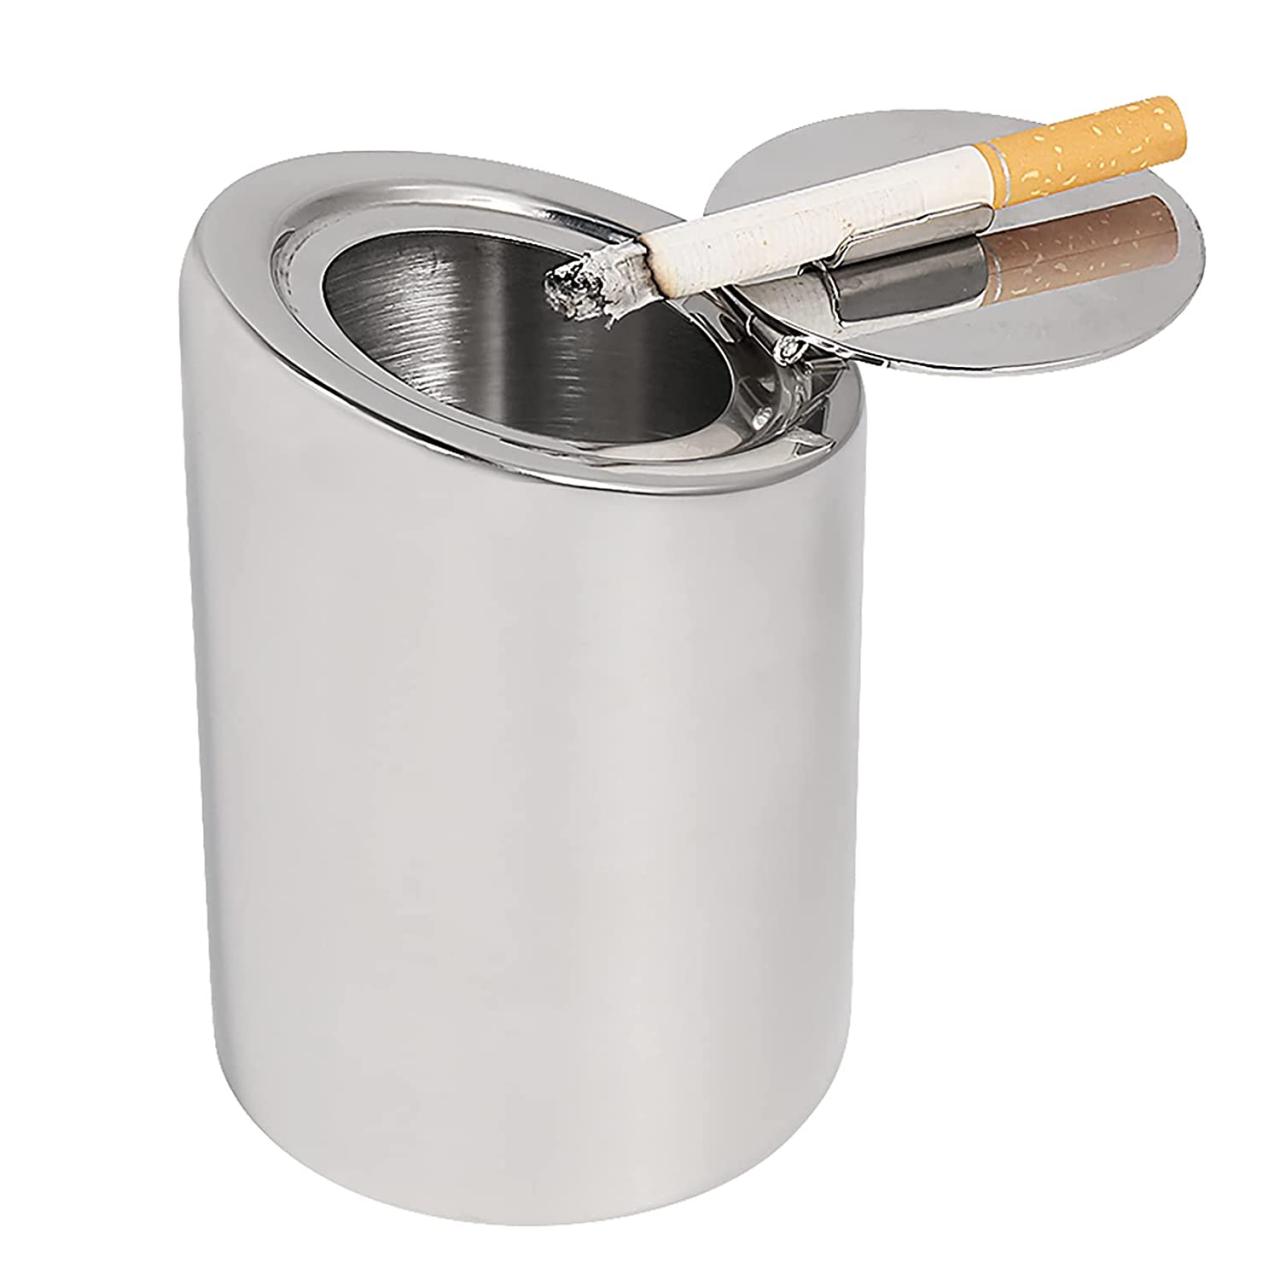 Newness Focus On Stainless Steel Car Ashtray, Newness Stainless Steel  Modern Car Ashtray with Lid, Cigarette Ashtray for Car, Auto, Indoor  Tabletop or Outdoor Use, Ash Holder for Smokers, Desktop Smok :